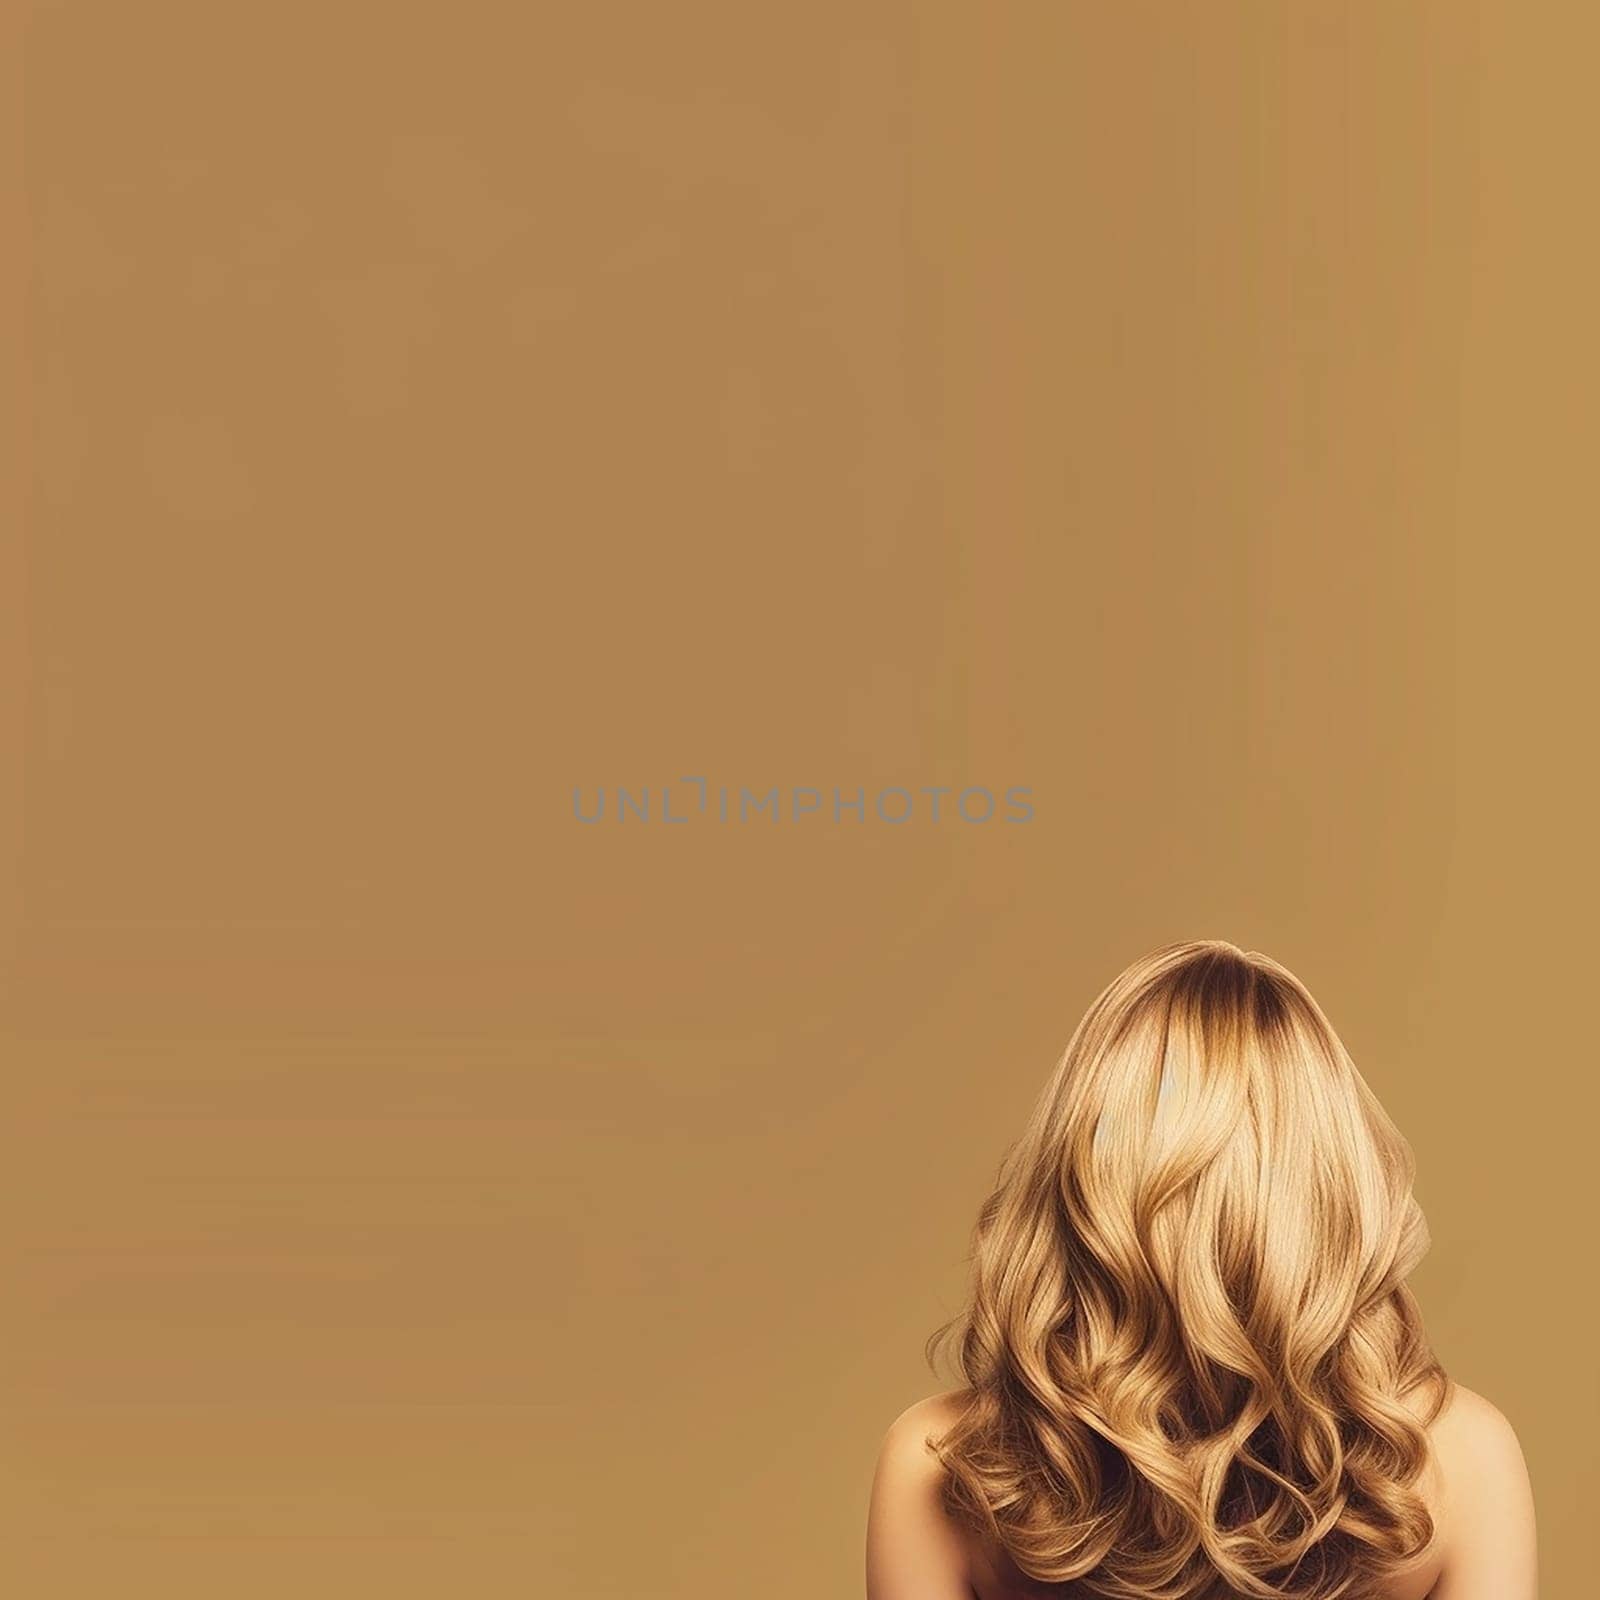 Back view of a person with curly blonde hair against a beige background. by Hype2art